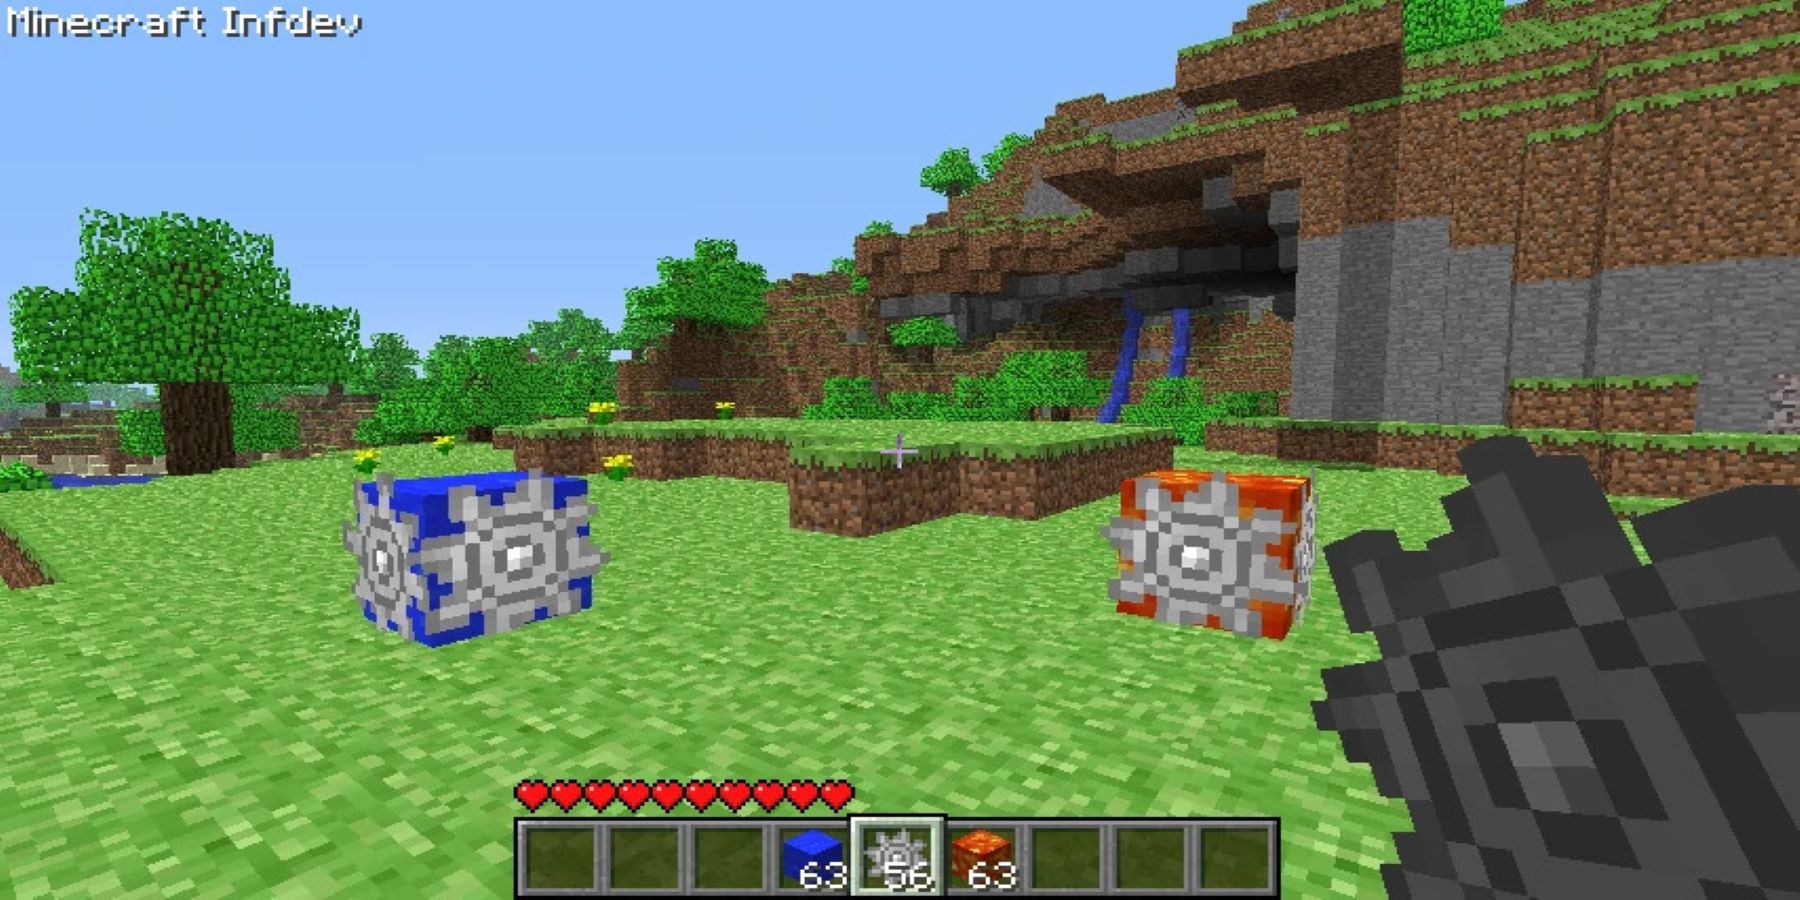 Gears on infinite water and lava blocks in Minecraft Infdev